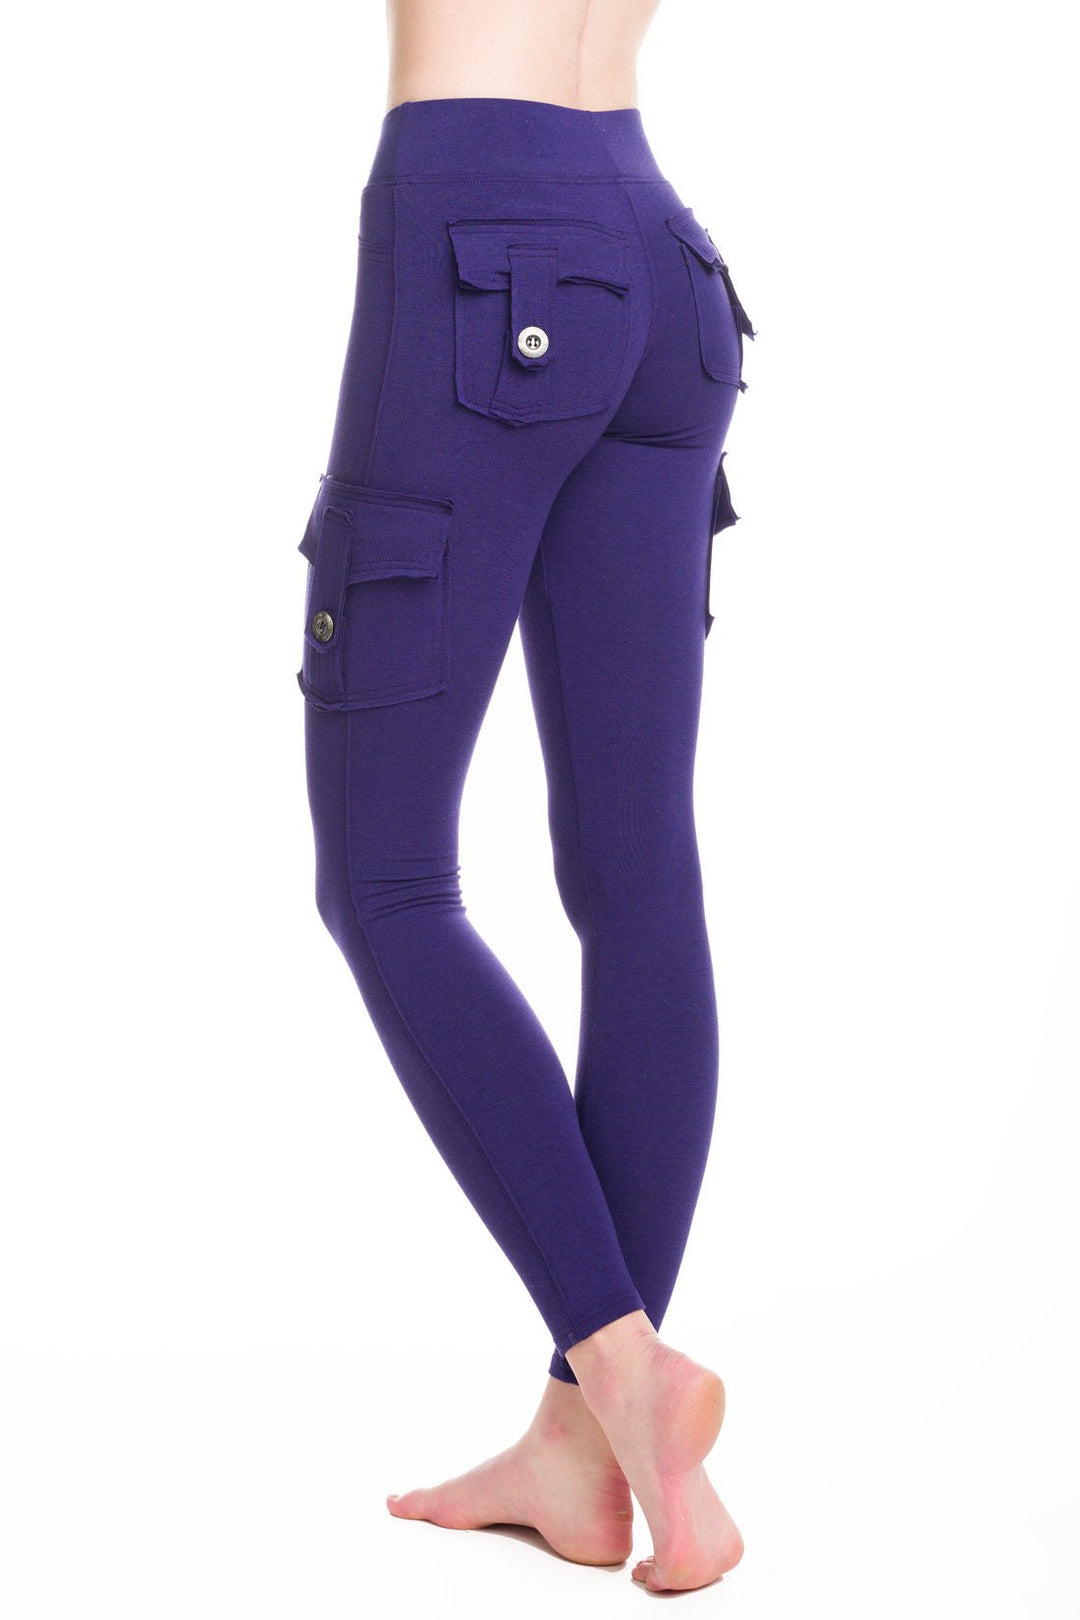 Dark purple bamboo cargo leggings with two back pockets and two side pockets